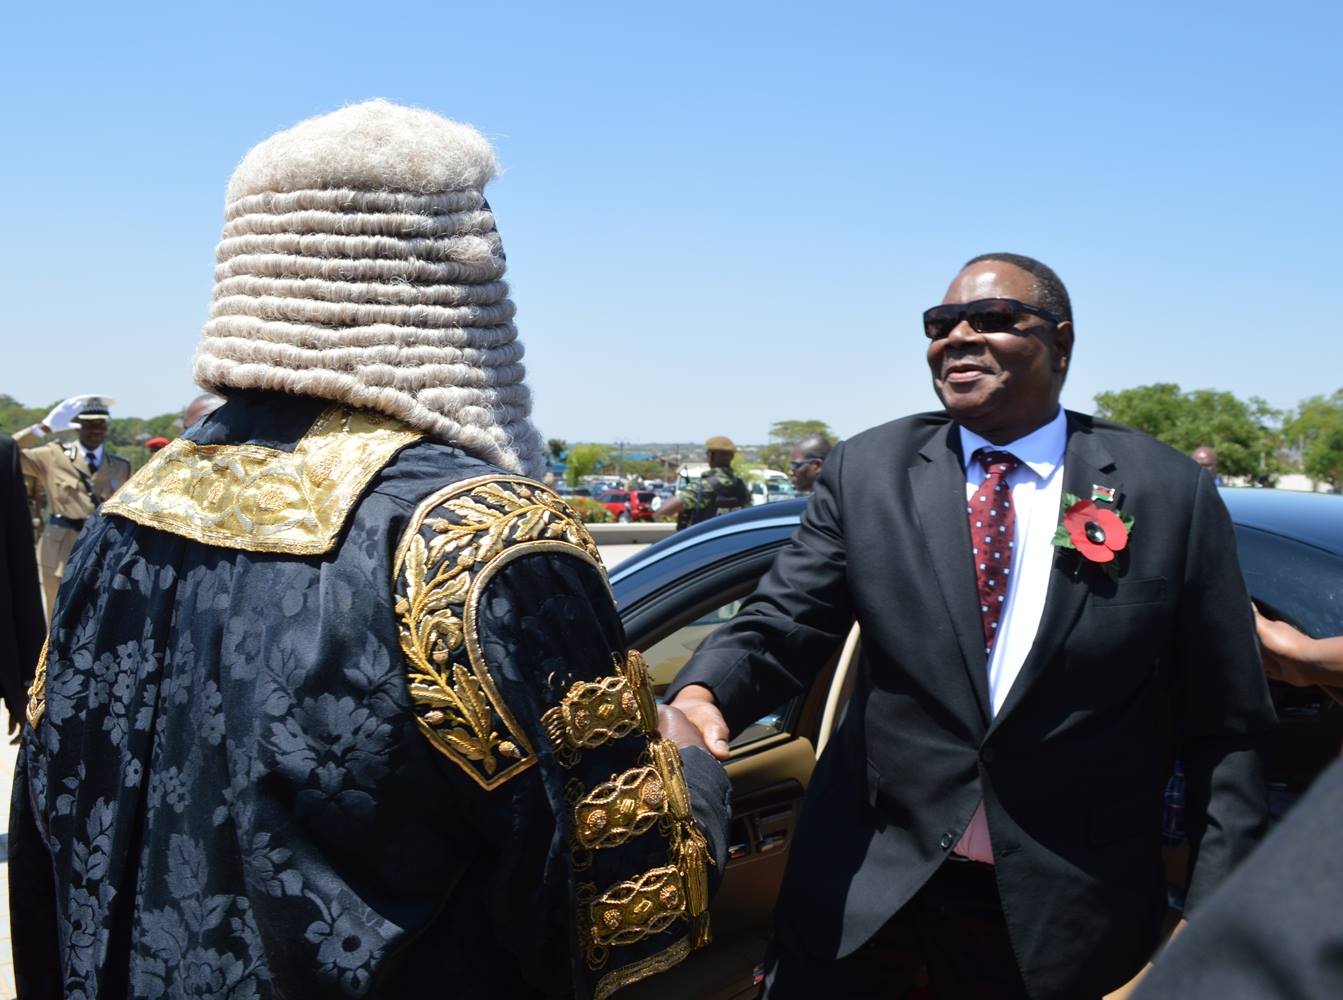 MPs PUZZLED WITH MUTHARIKA’s SPEECH